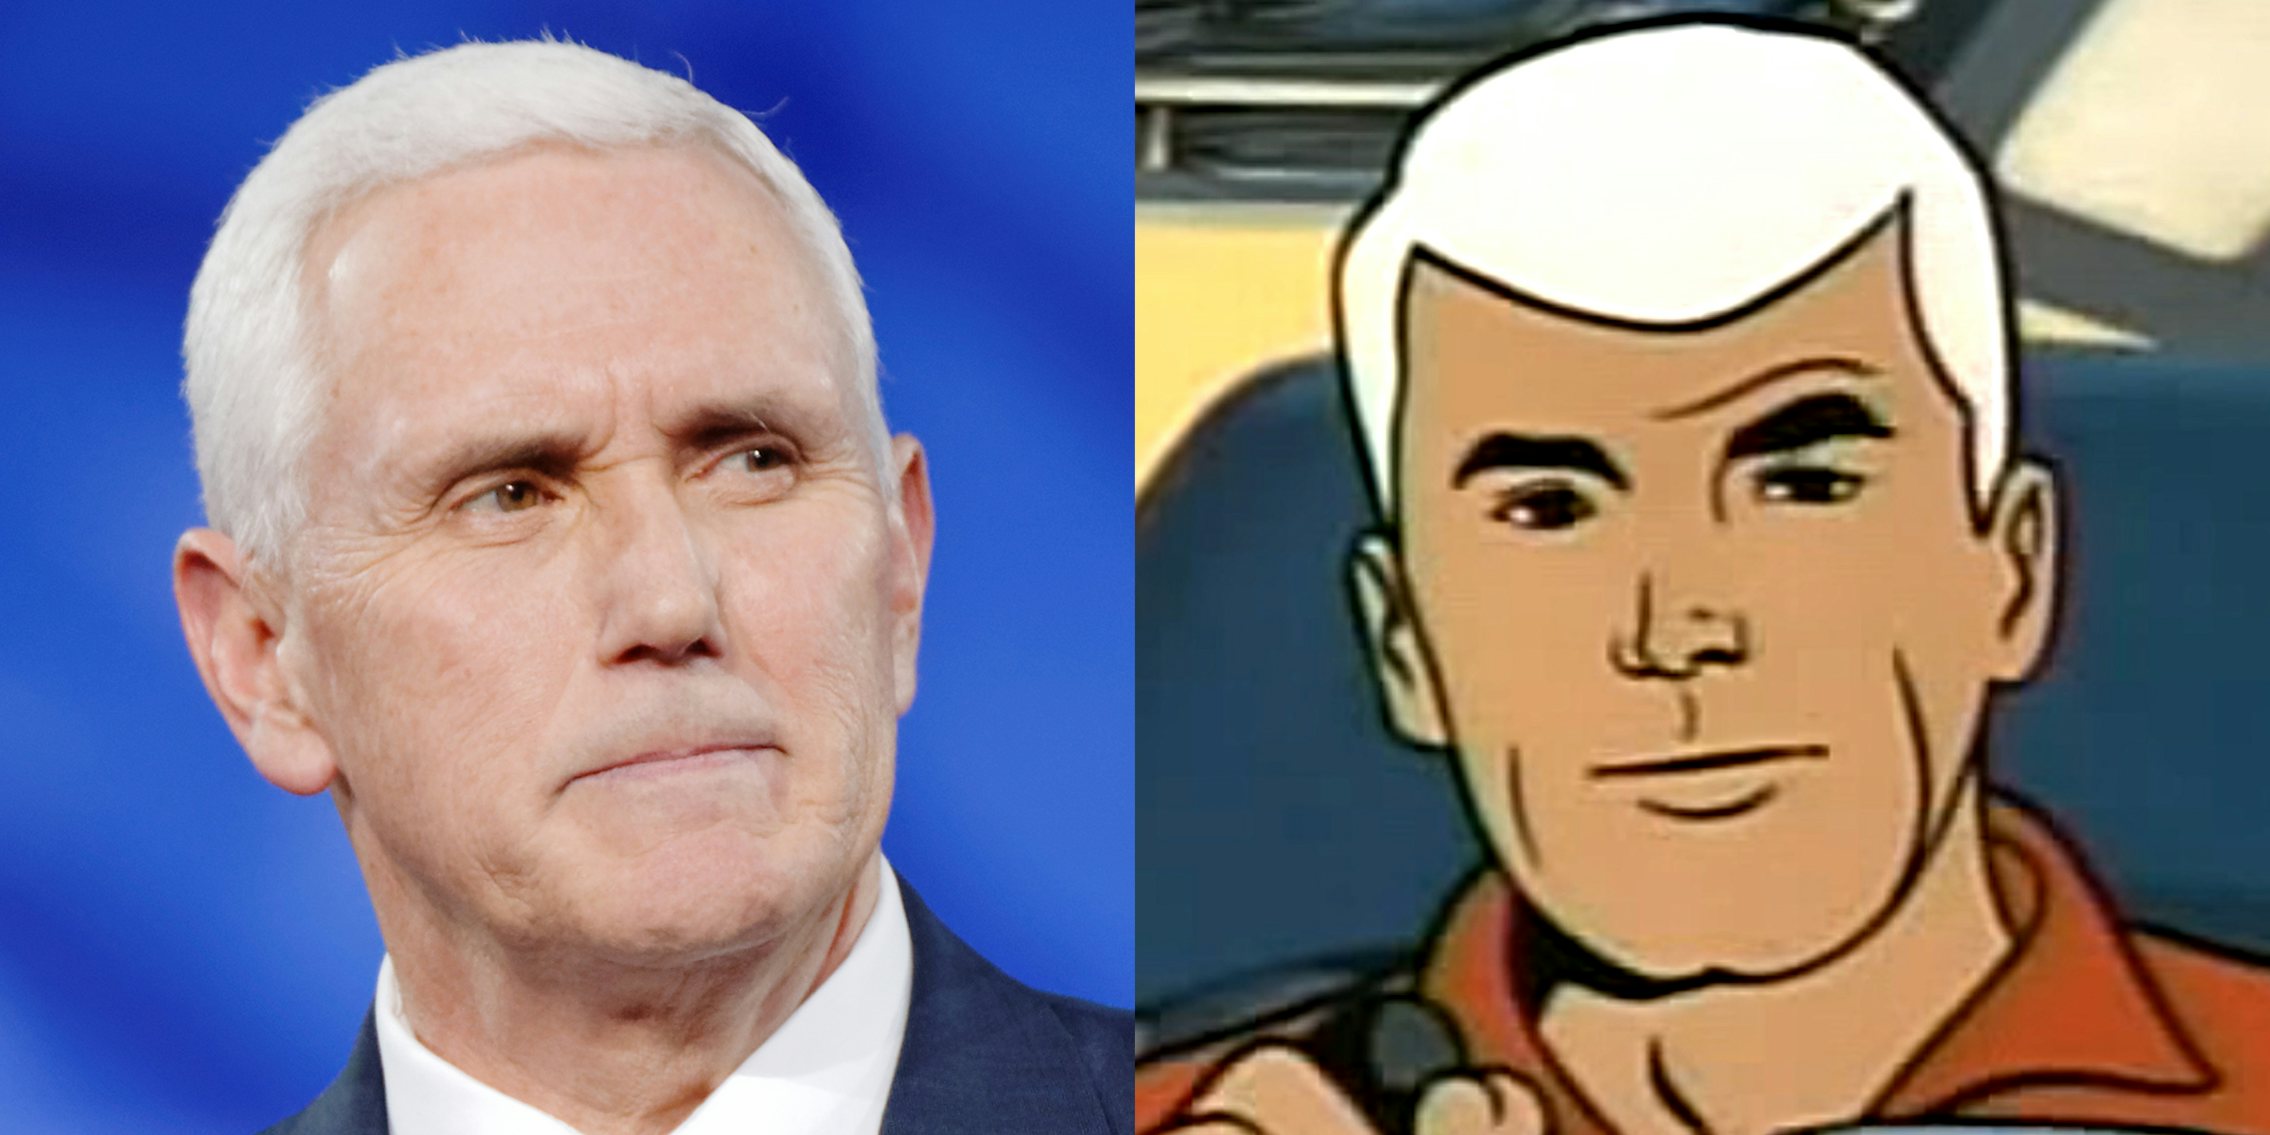 Is Mike Pence really 'Race' Bannon?